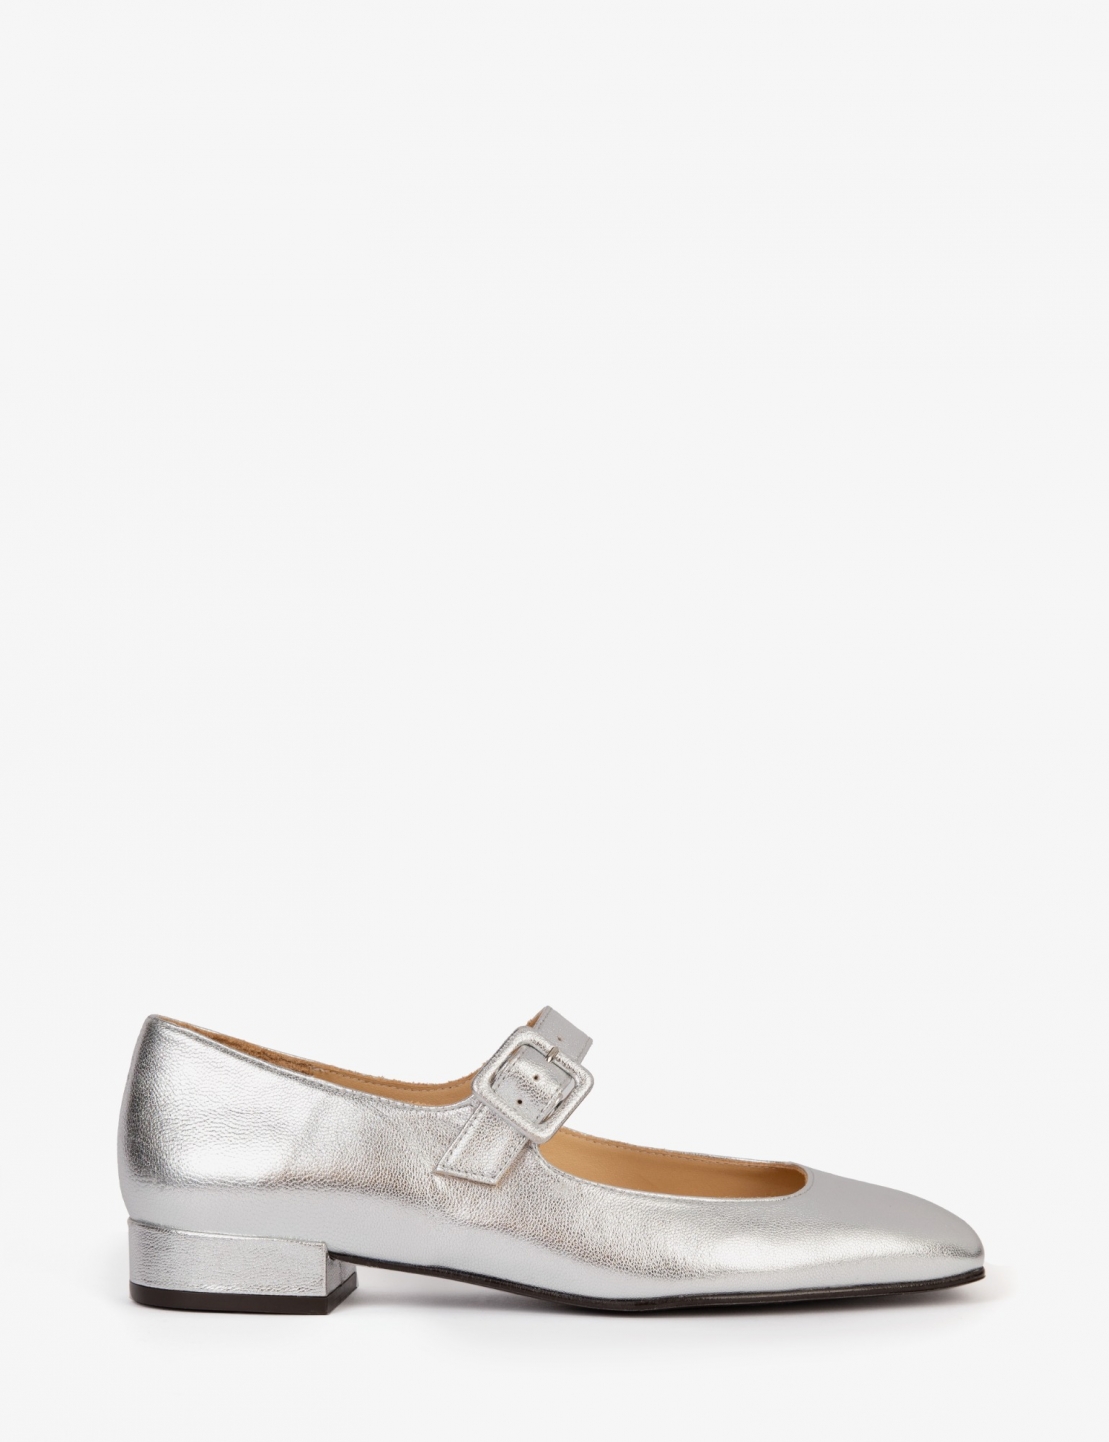 Low Mary Jane Leather Shoe - Silver | Women's Shoes | Penelope Chilvers